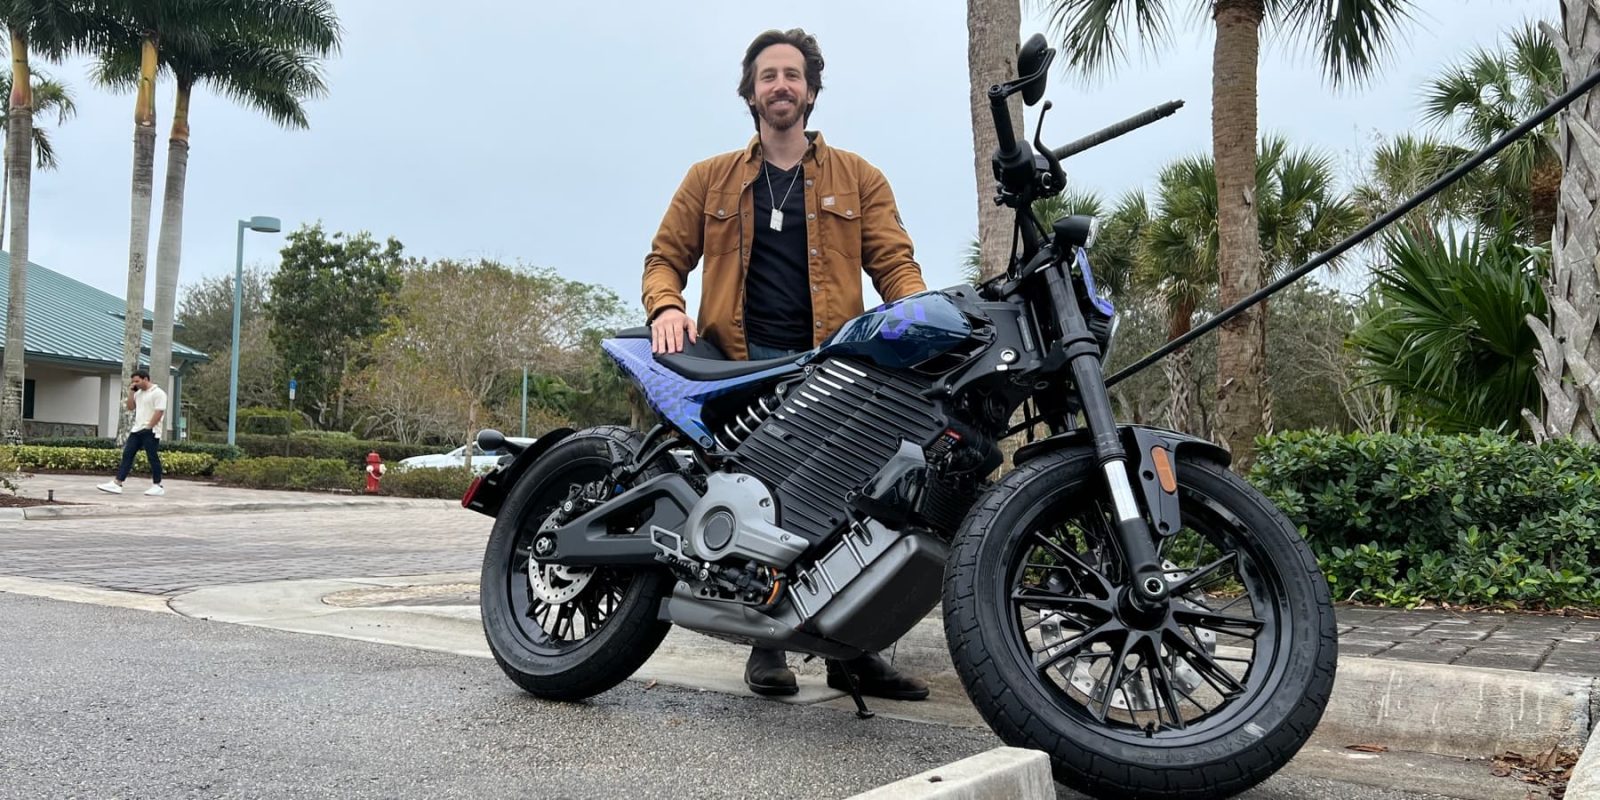 I bought Harley's new electric motorcycle, here's what showed up